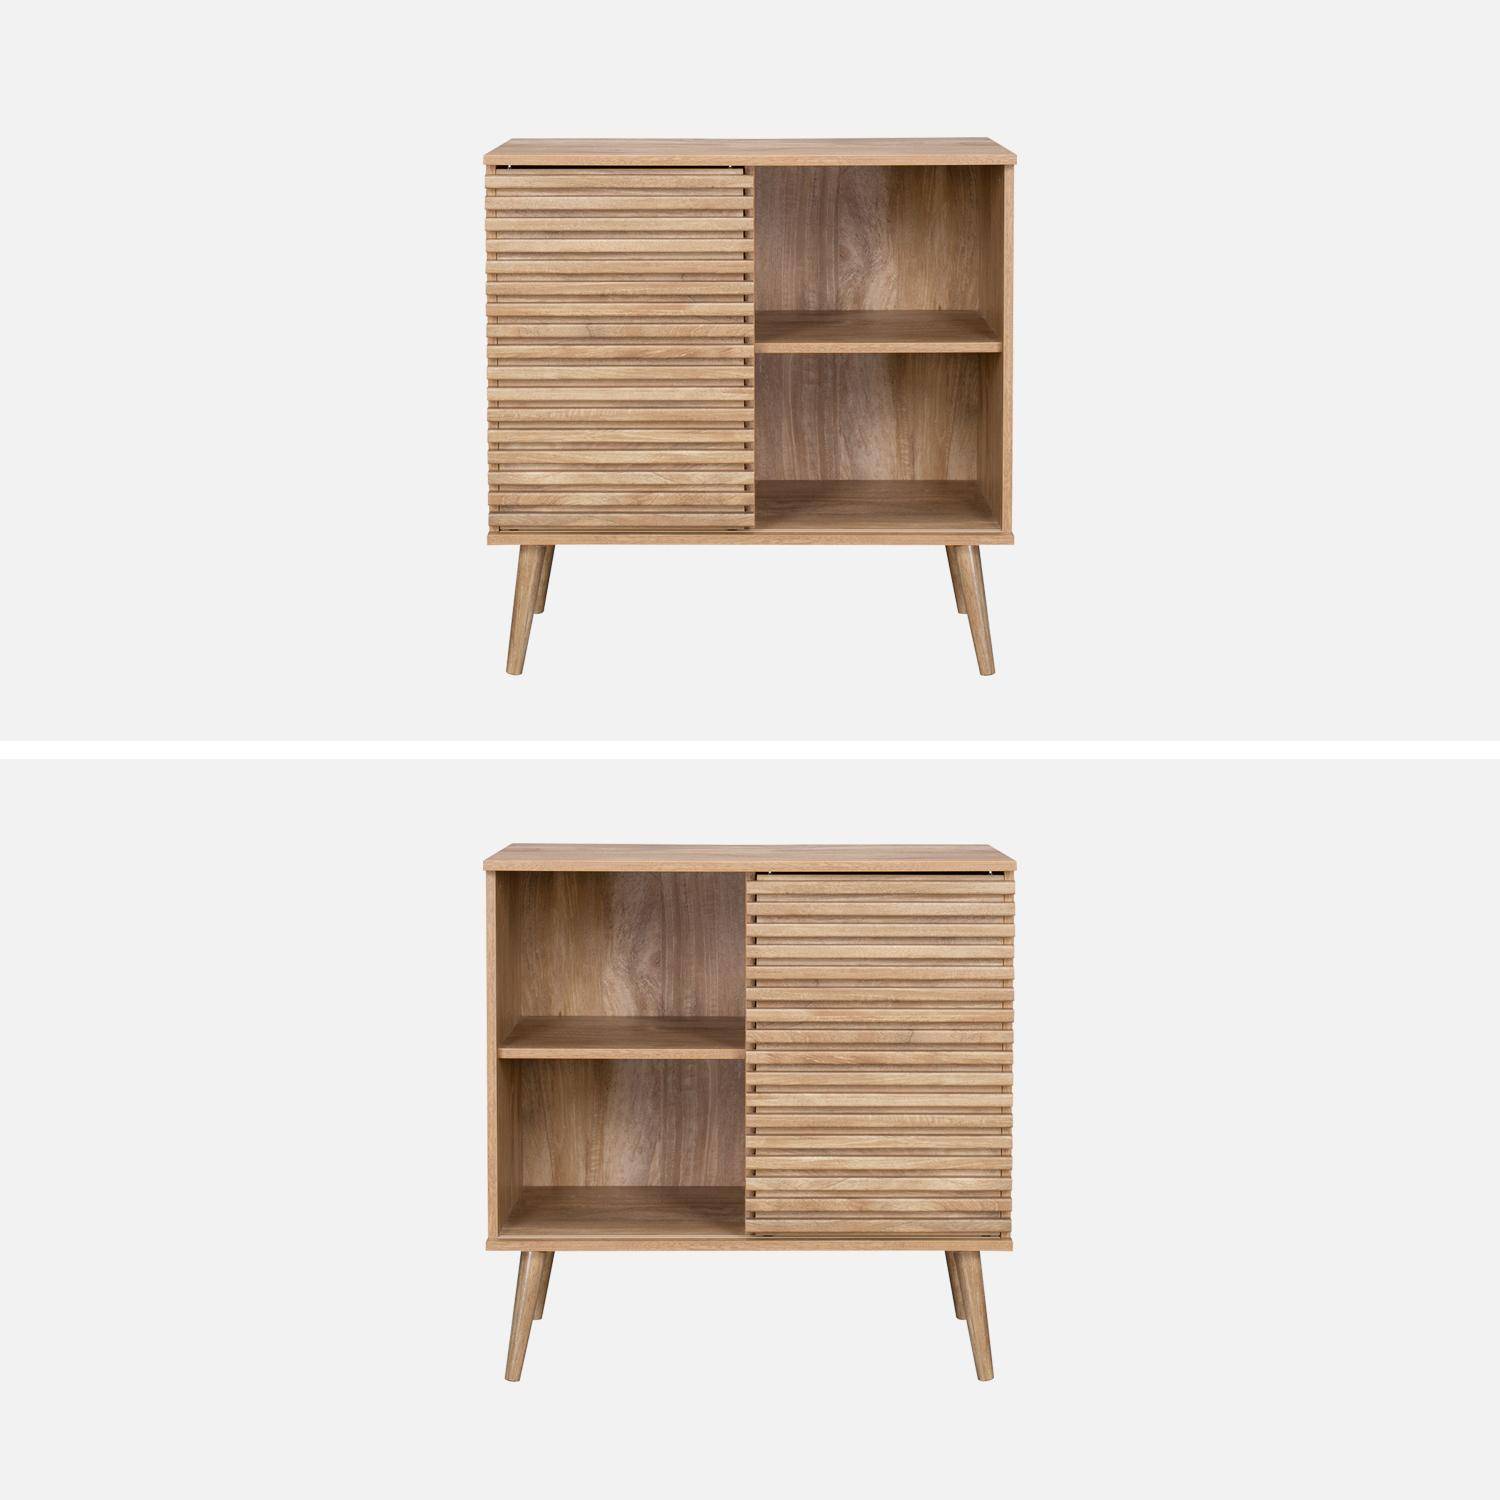 Scandinavian sideboard in wood decor with 1 grooved sliding door and 2 shelves Photo6